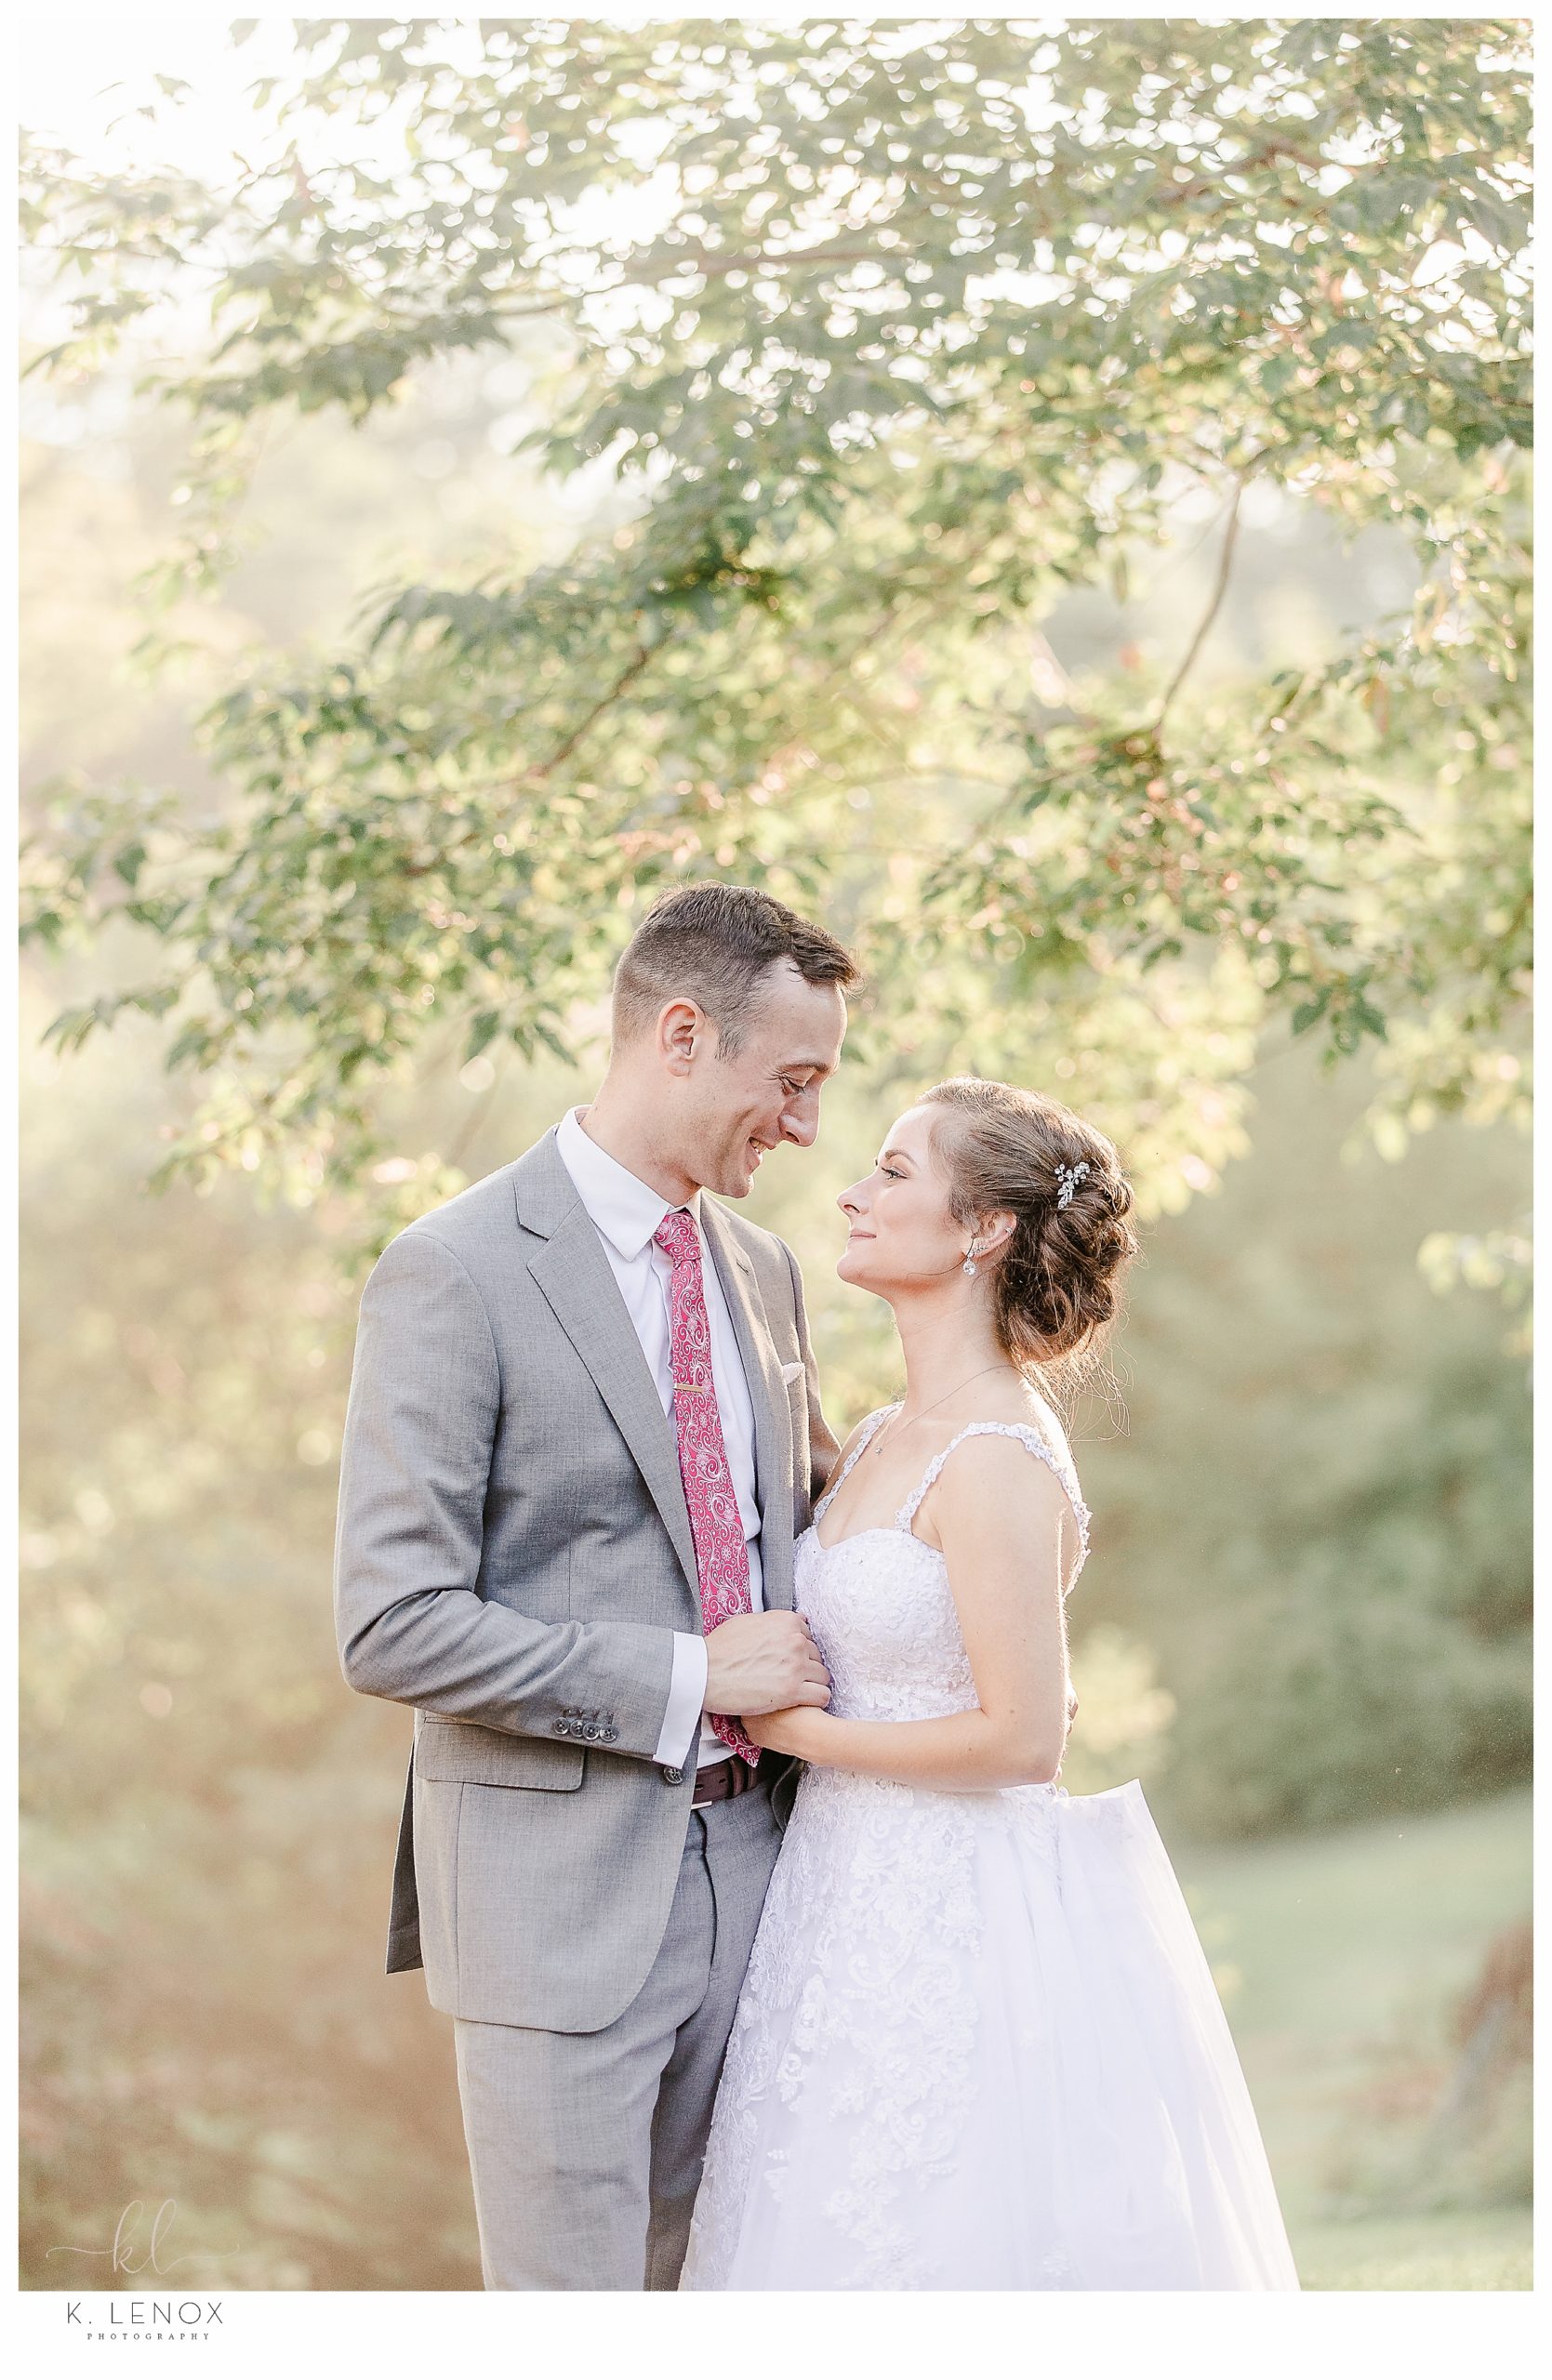 Pastel colors,  Light and Airy Bride and Groom portrait